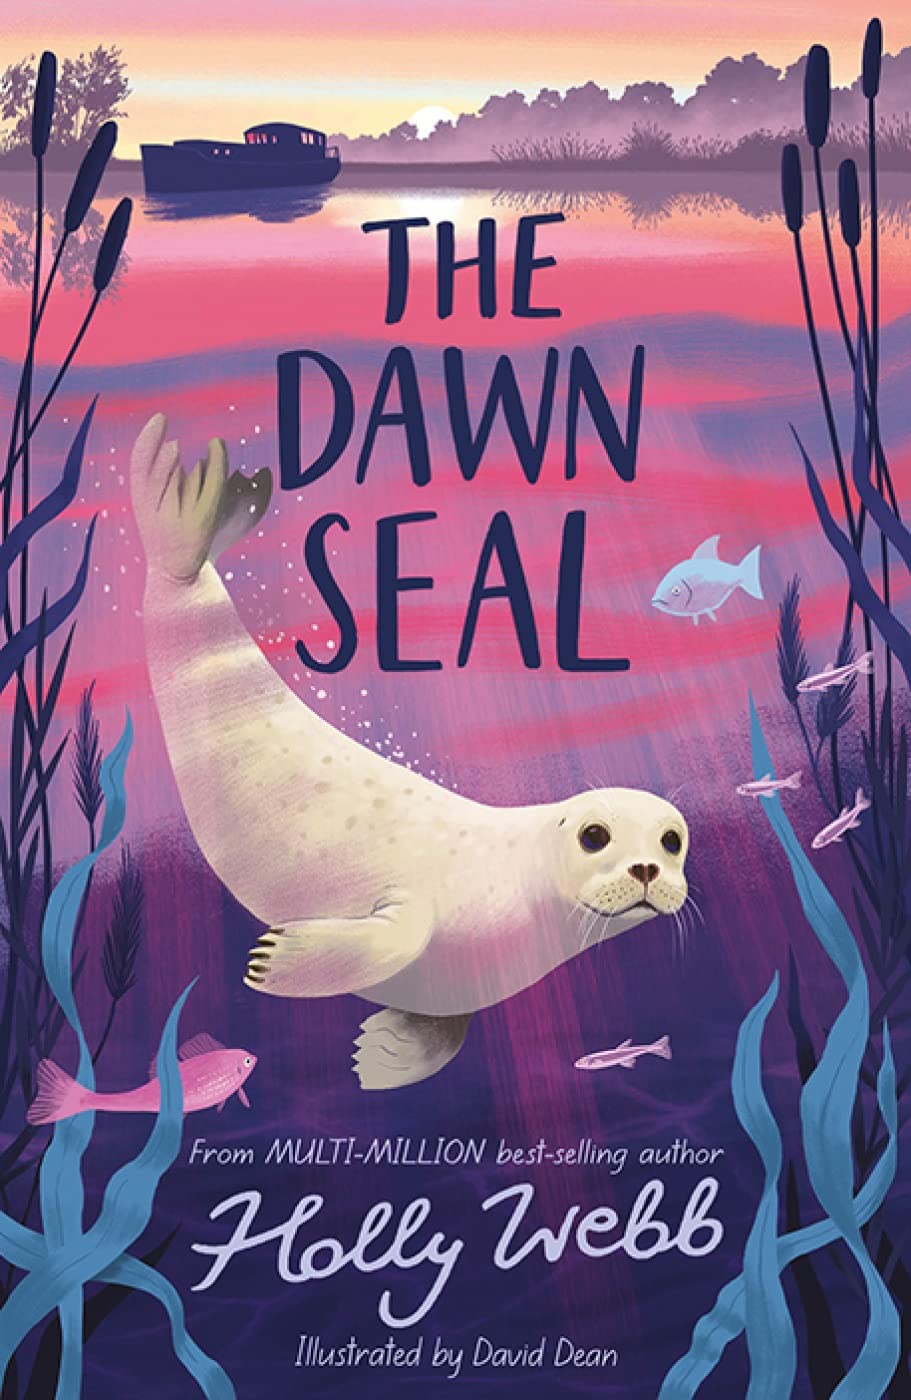 Don't Miss Your Chance to Save on The Dawn Seal!